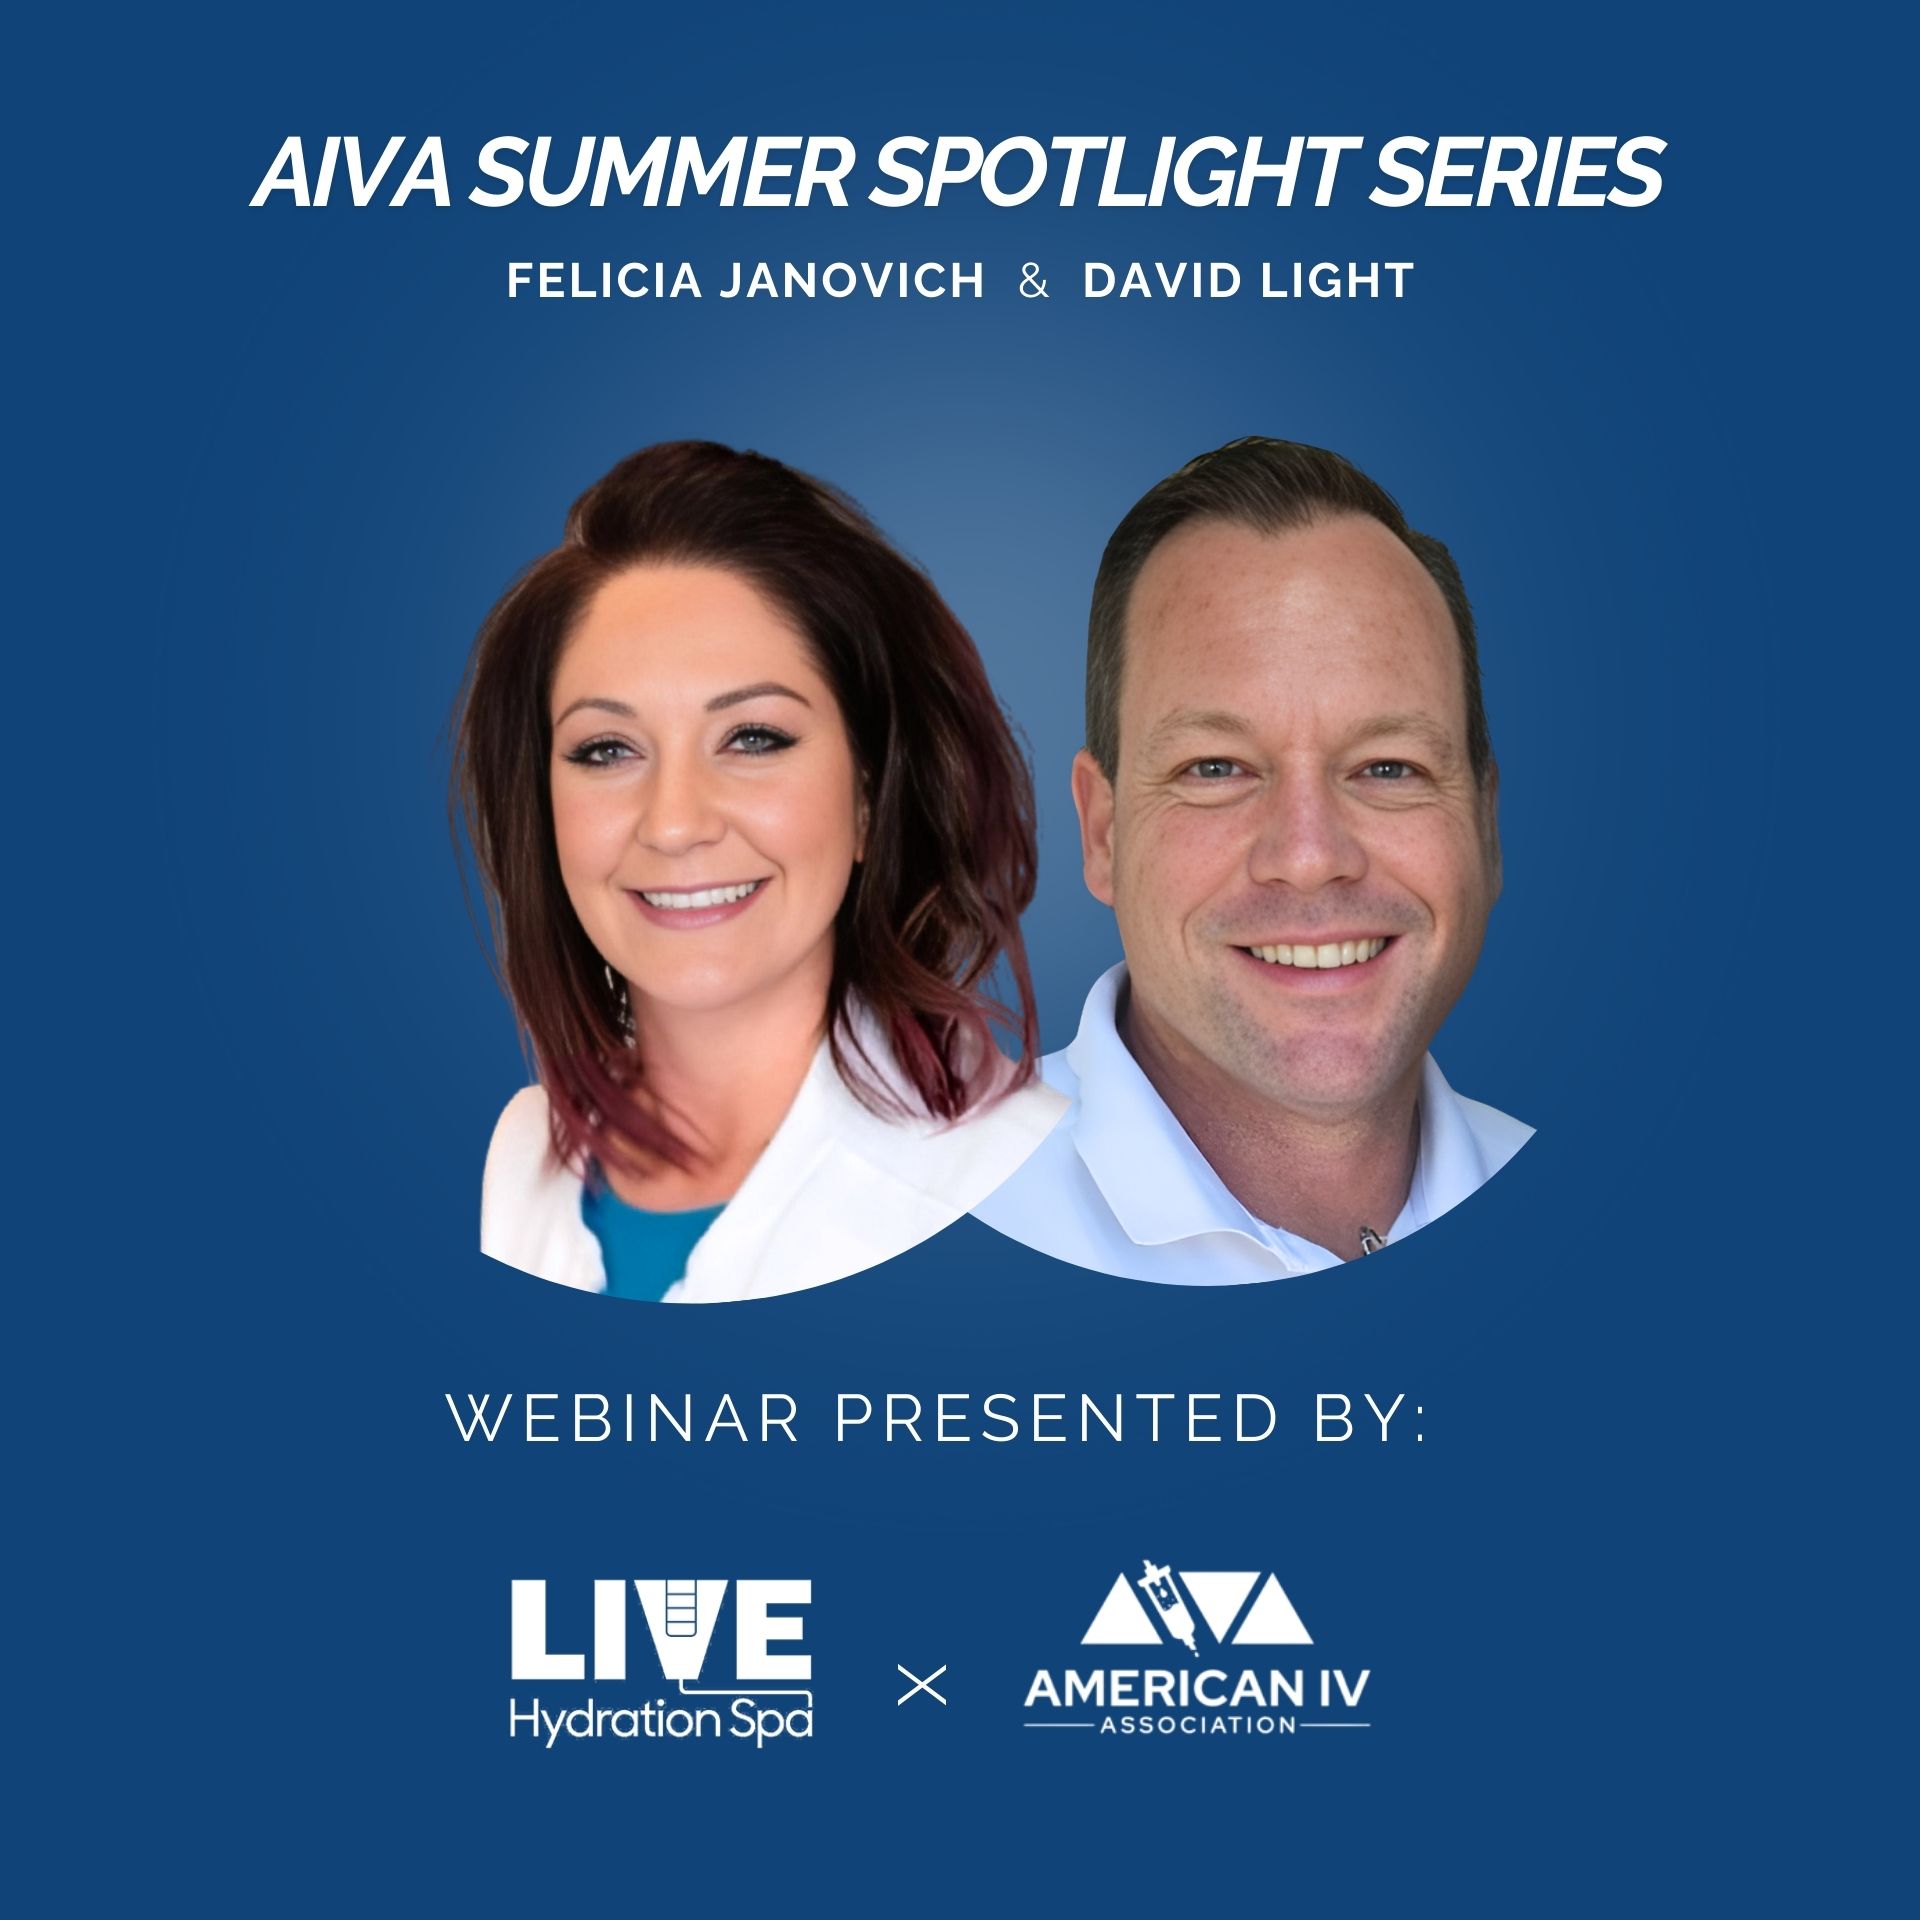 AIVA Summer Series Webinar with Felicia Janovich from Live Hydration Spa,